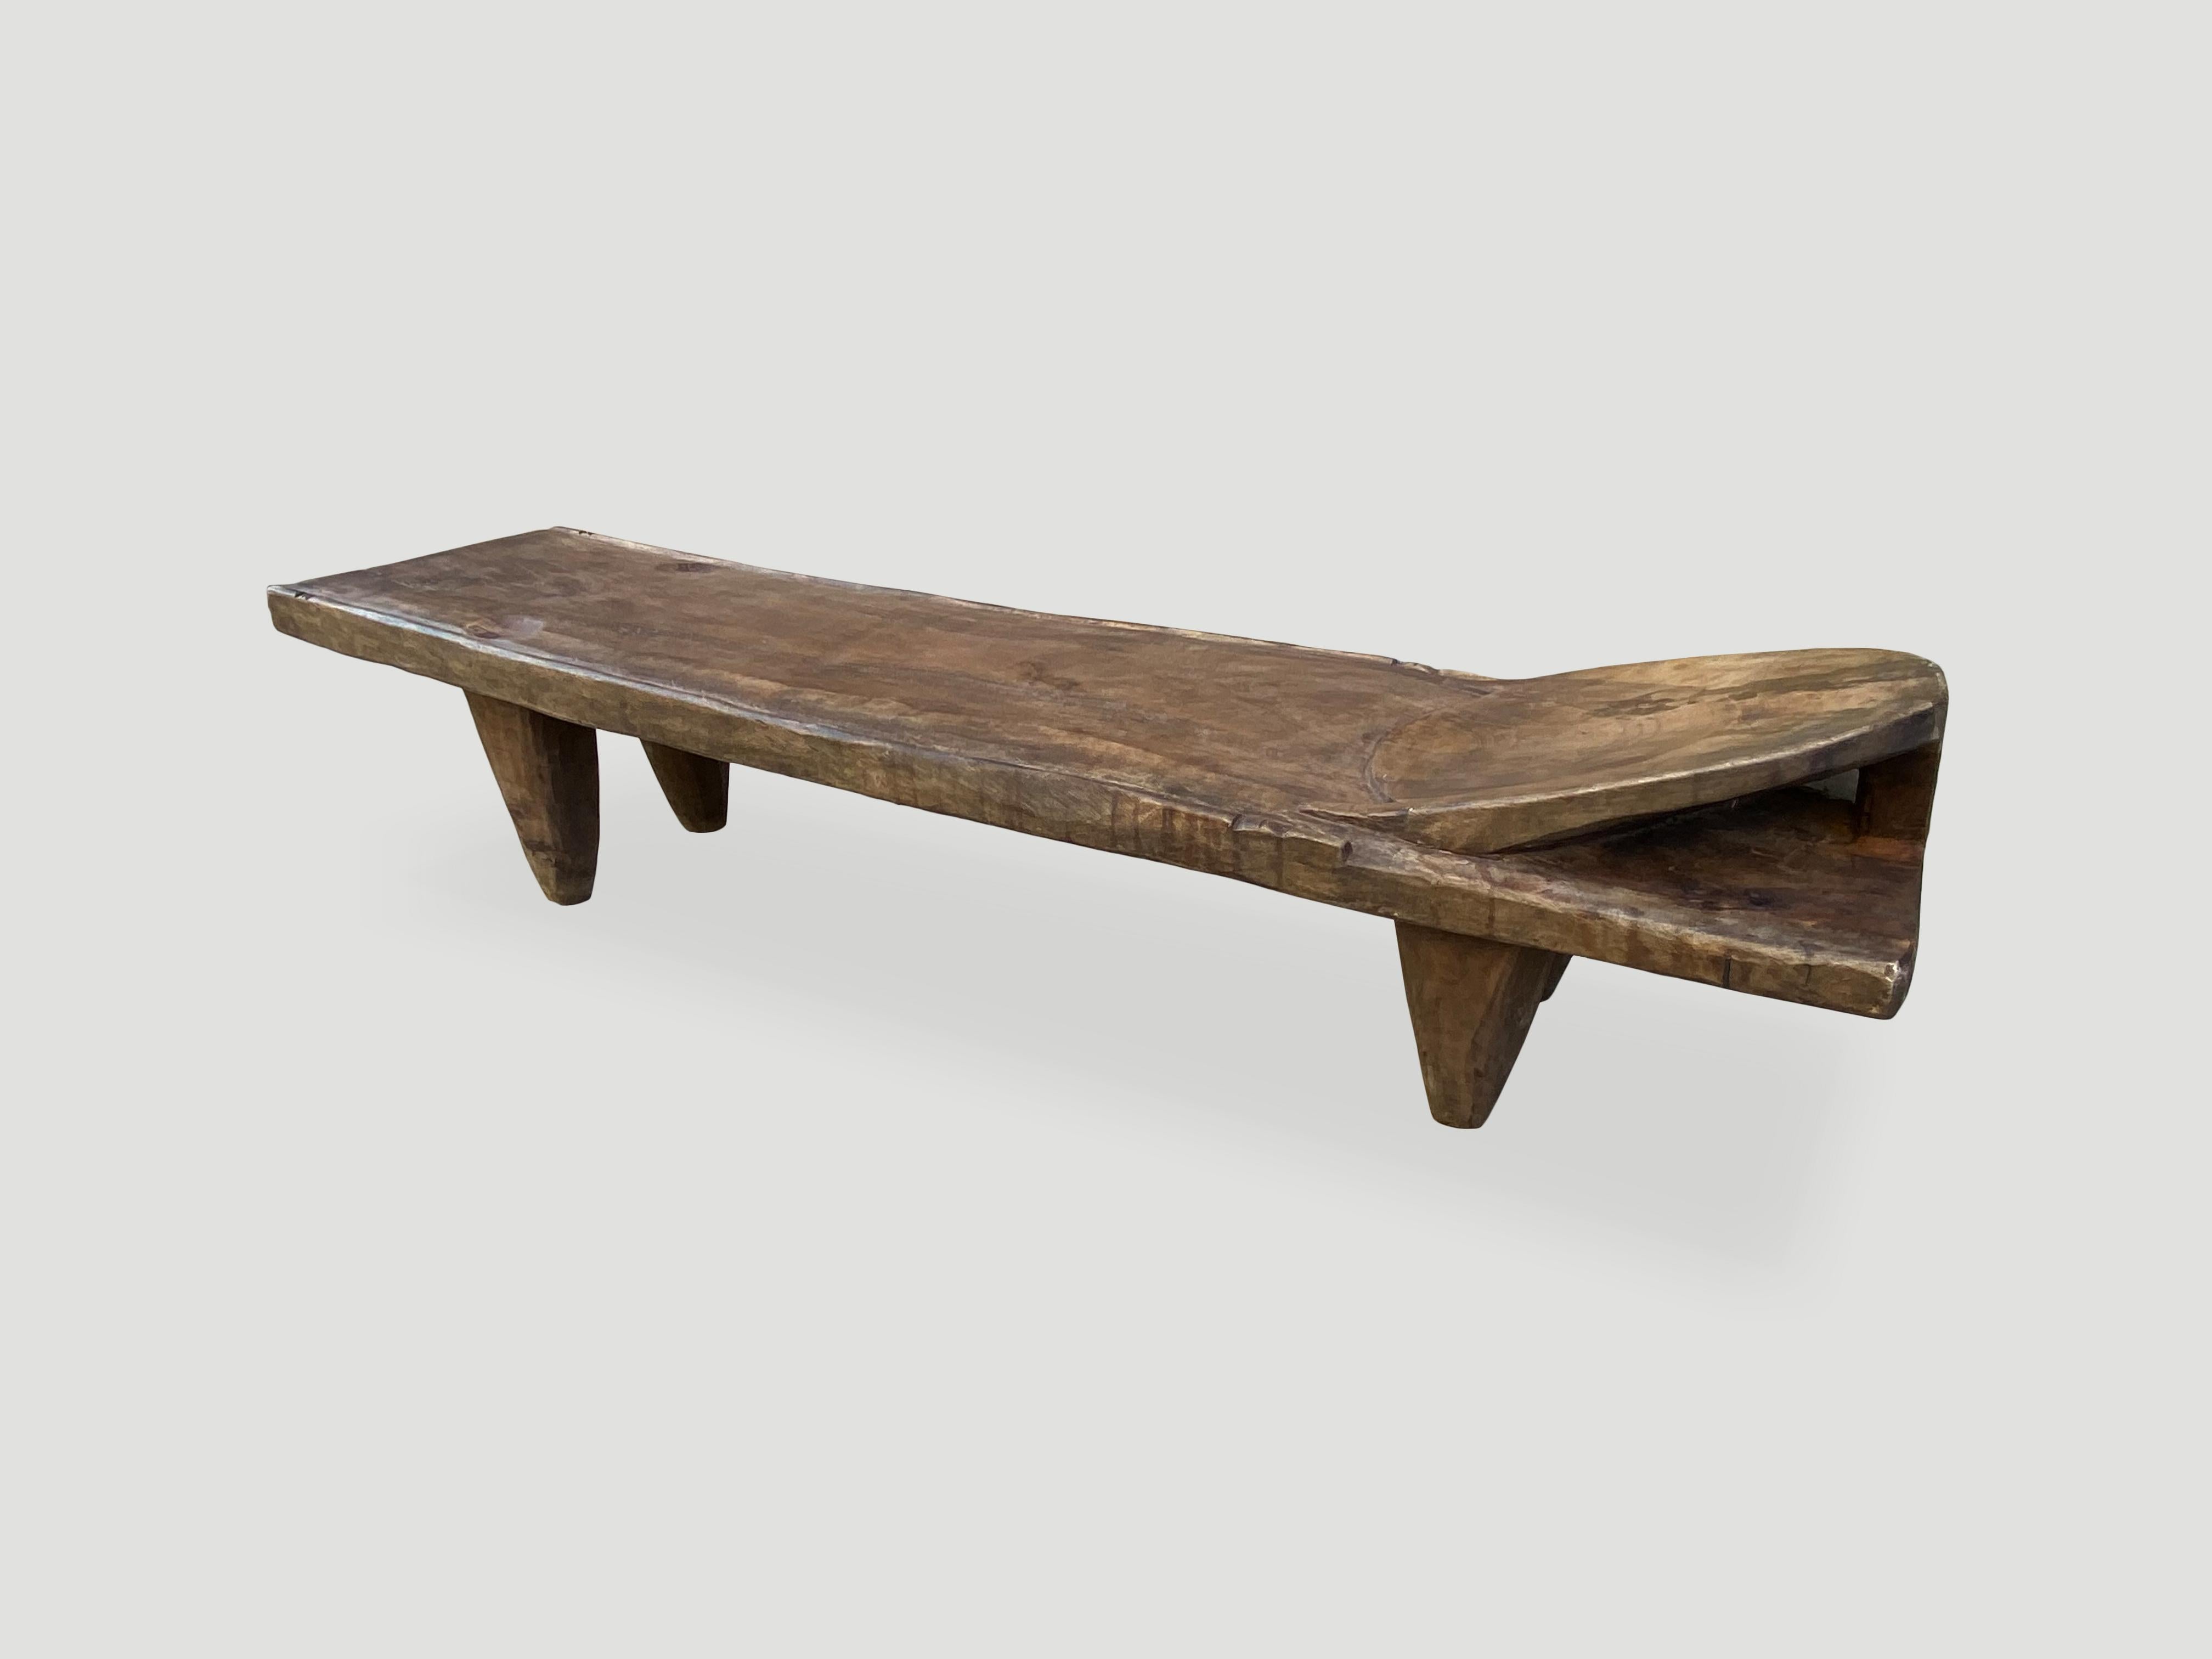 Tribal Andrianna Shamaris Cote d’Ivoire Senufo Day Bed, Bench or Coffee Table